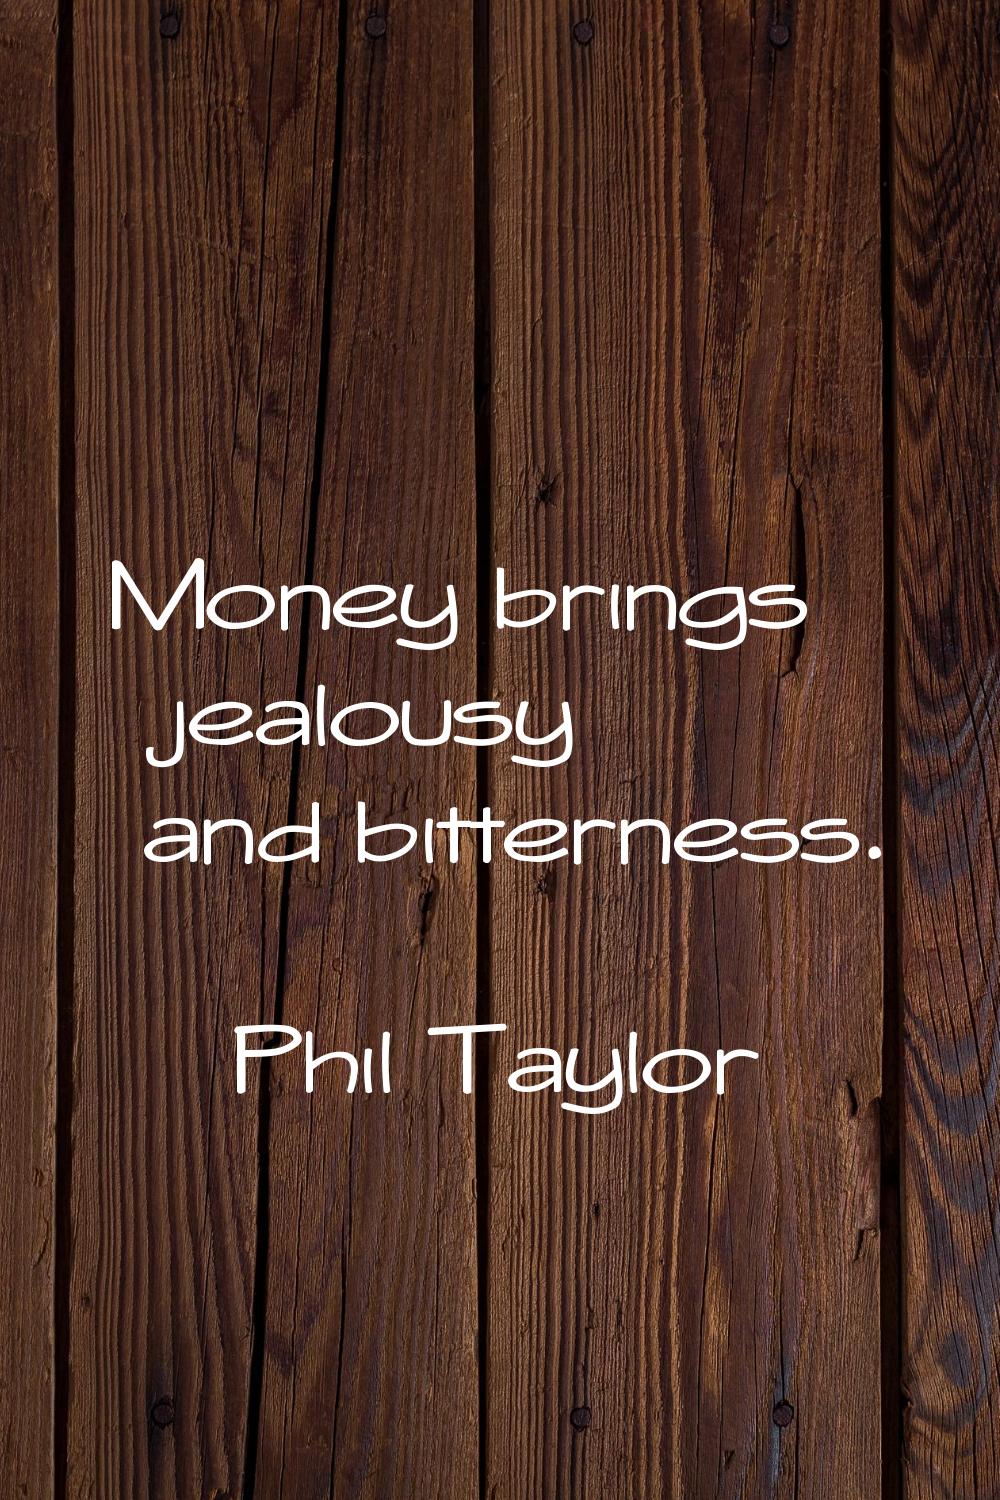 Money brings jealousy and bitterness.